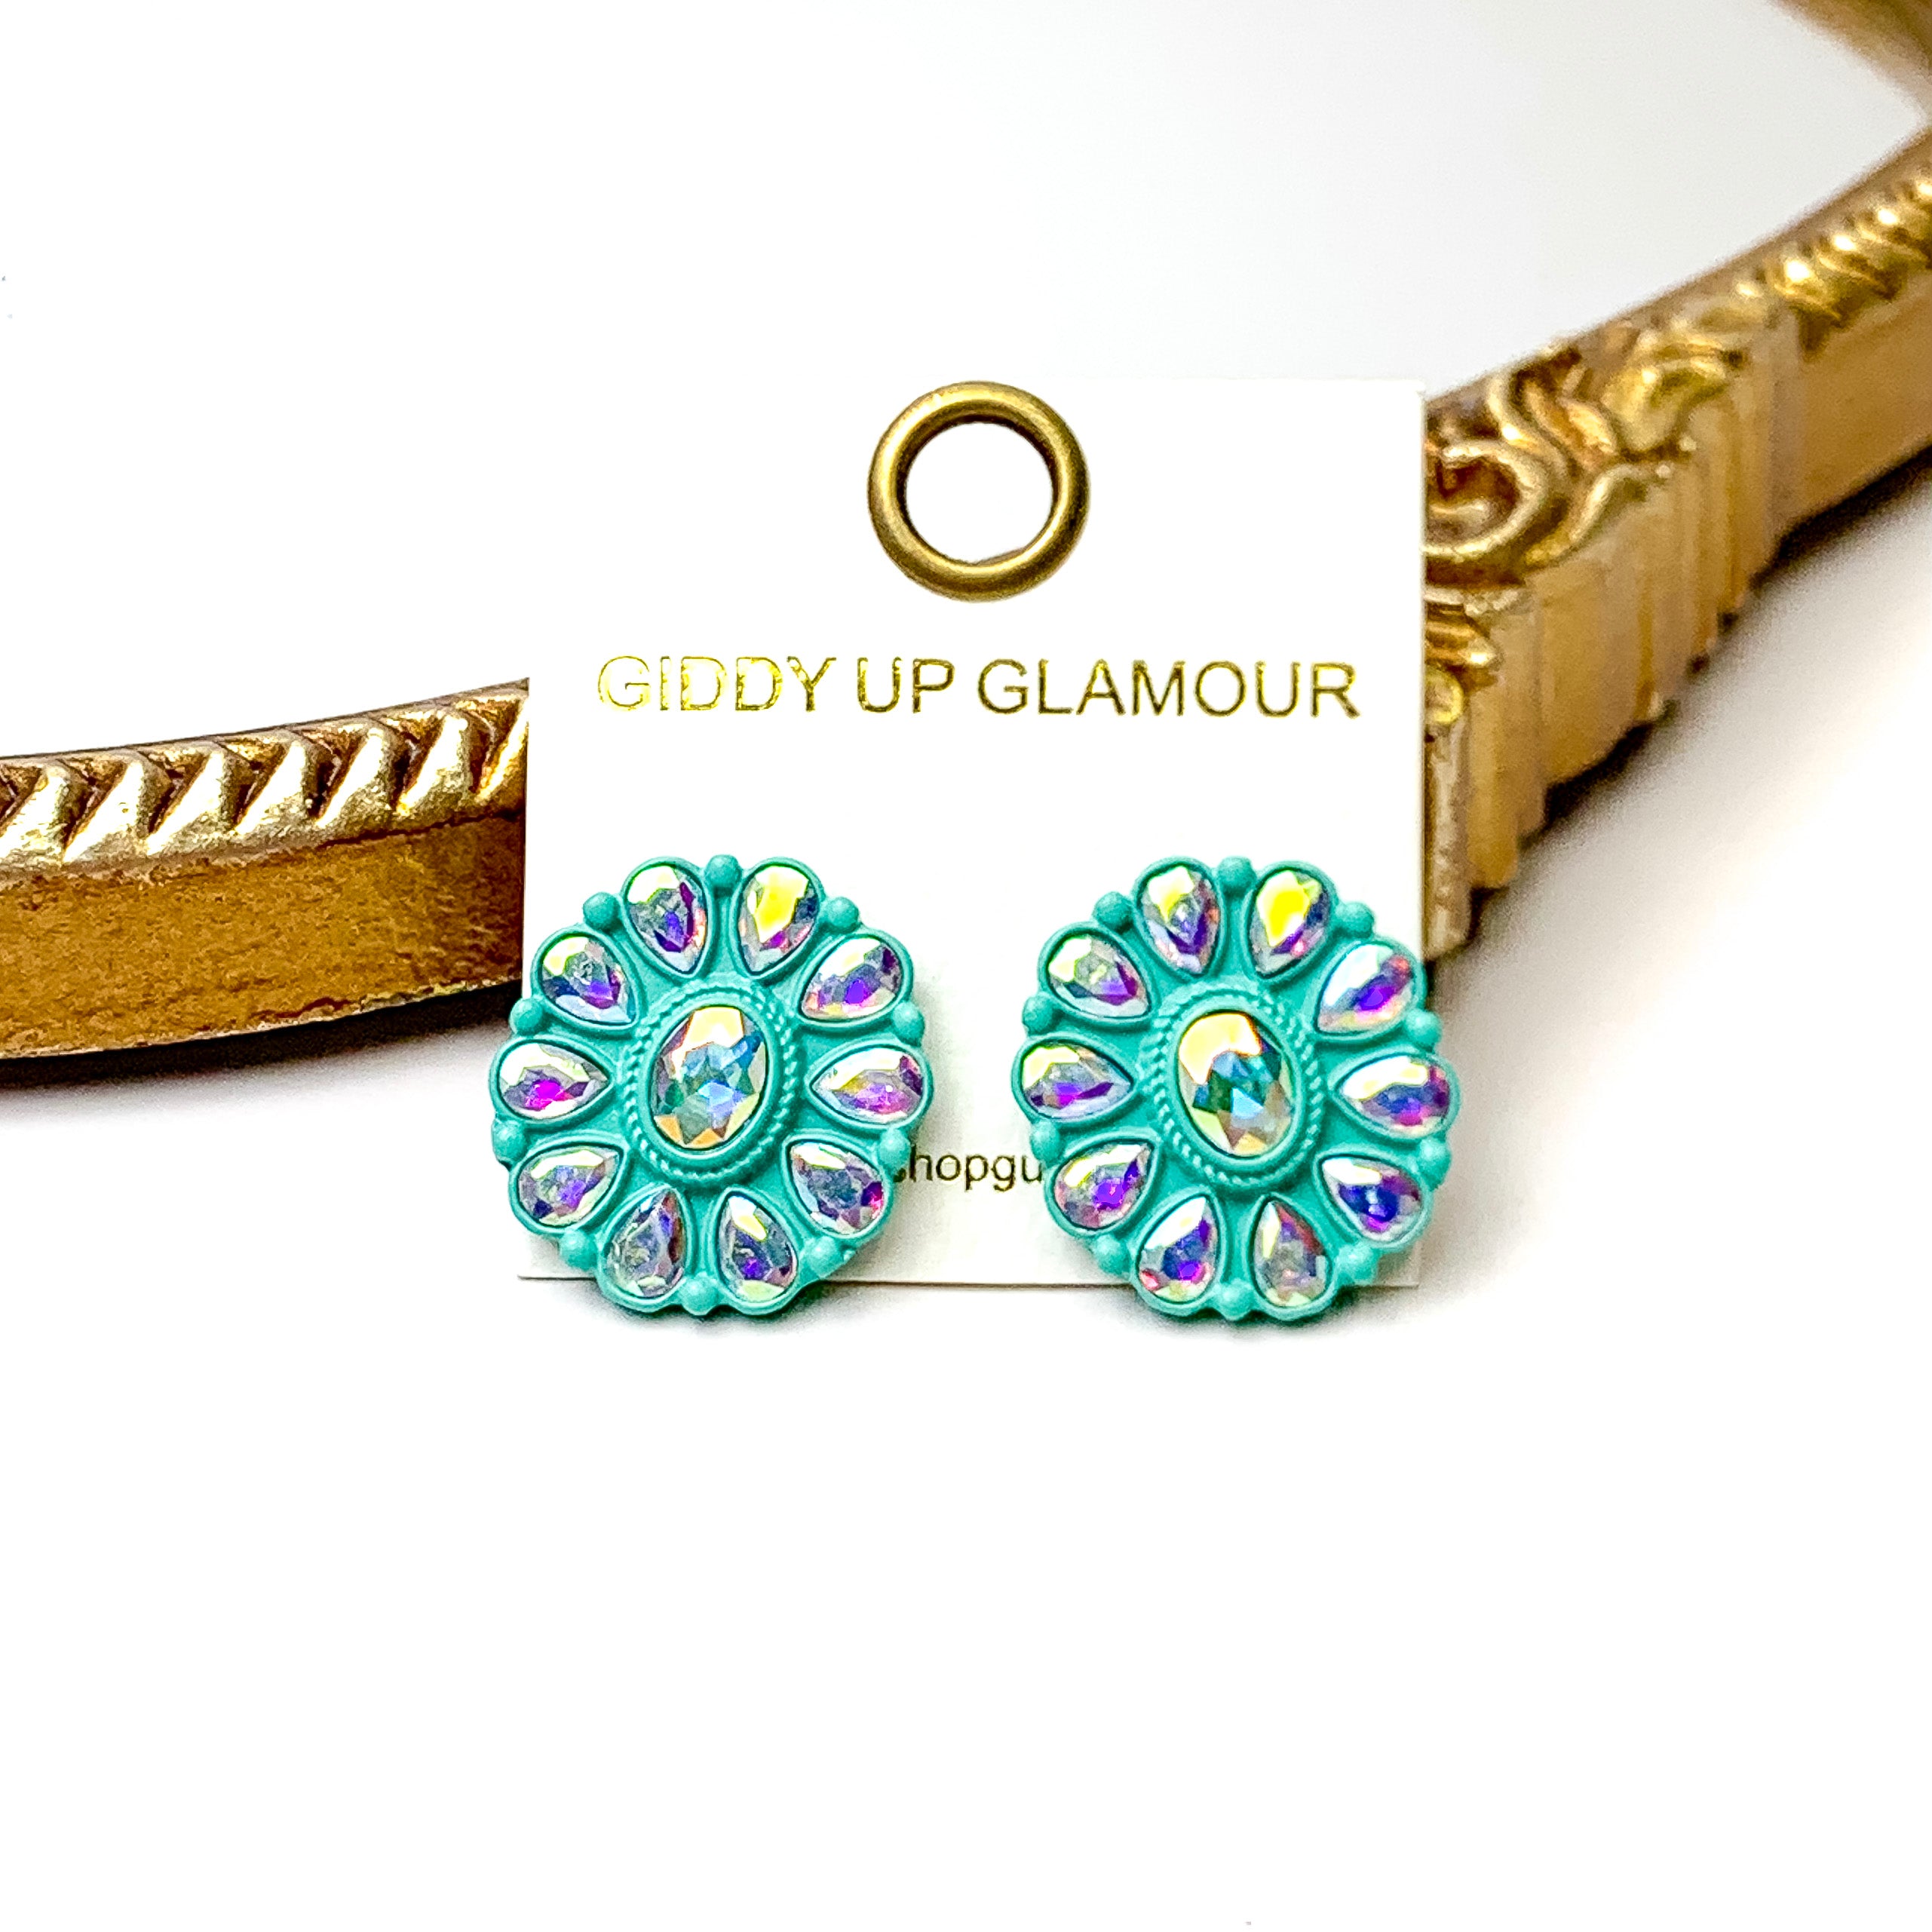 Prismatic Petal AB Stone Flower Concho Stud Earrings in Turquoise - Giddy Up Glamour Boutique